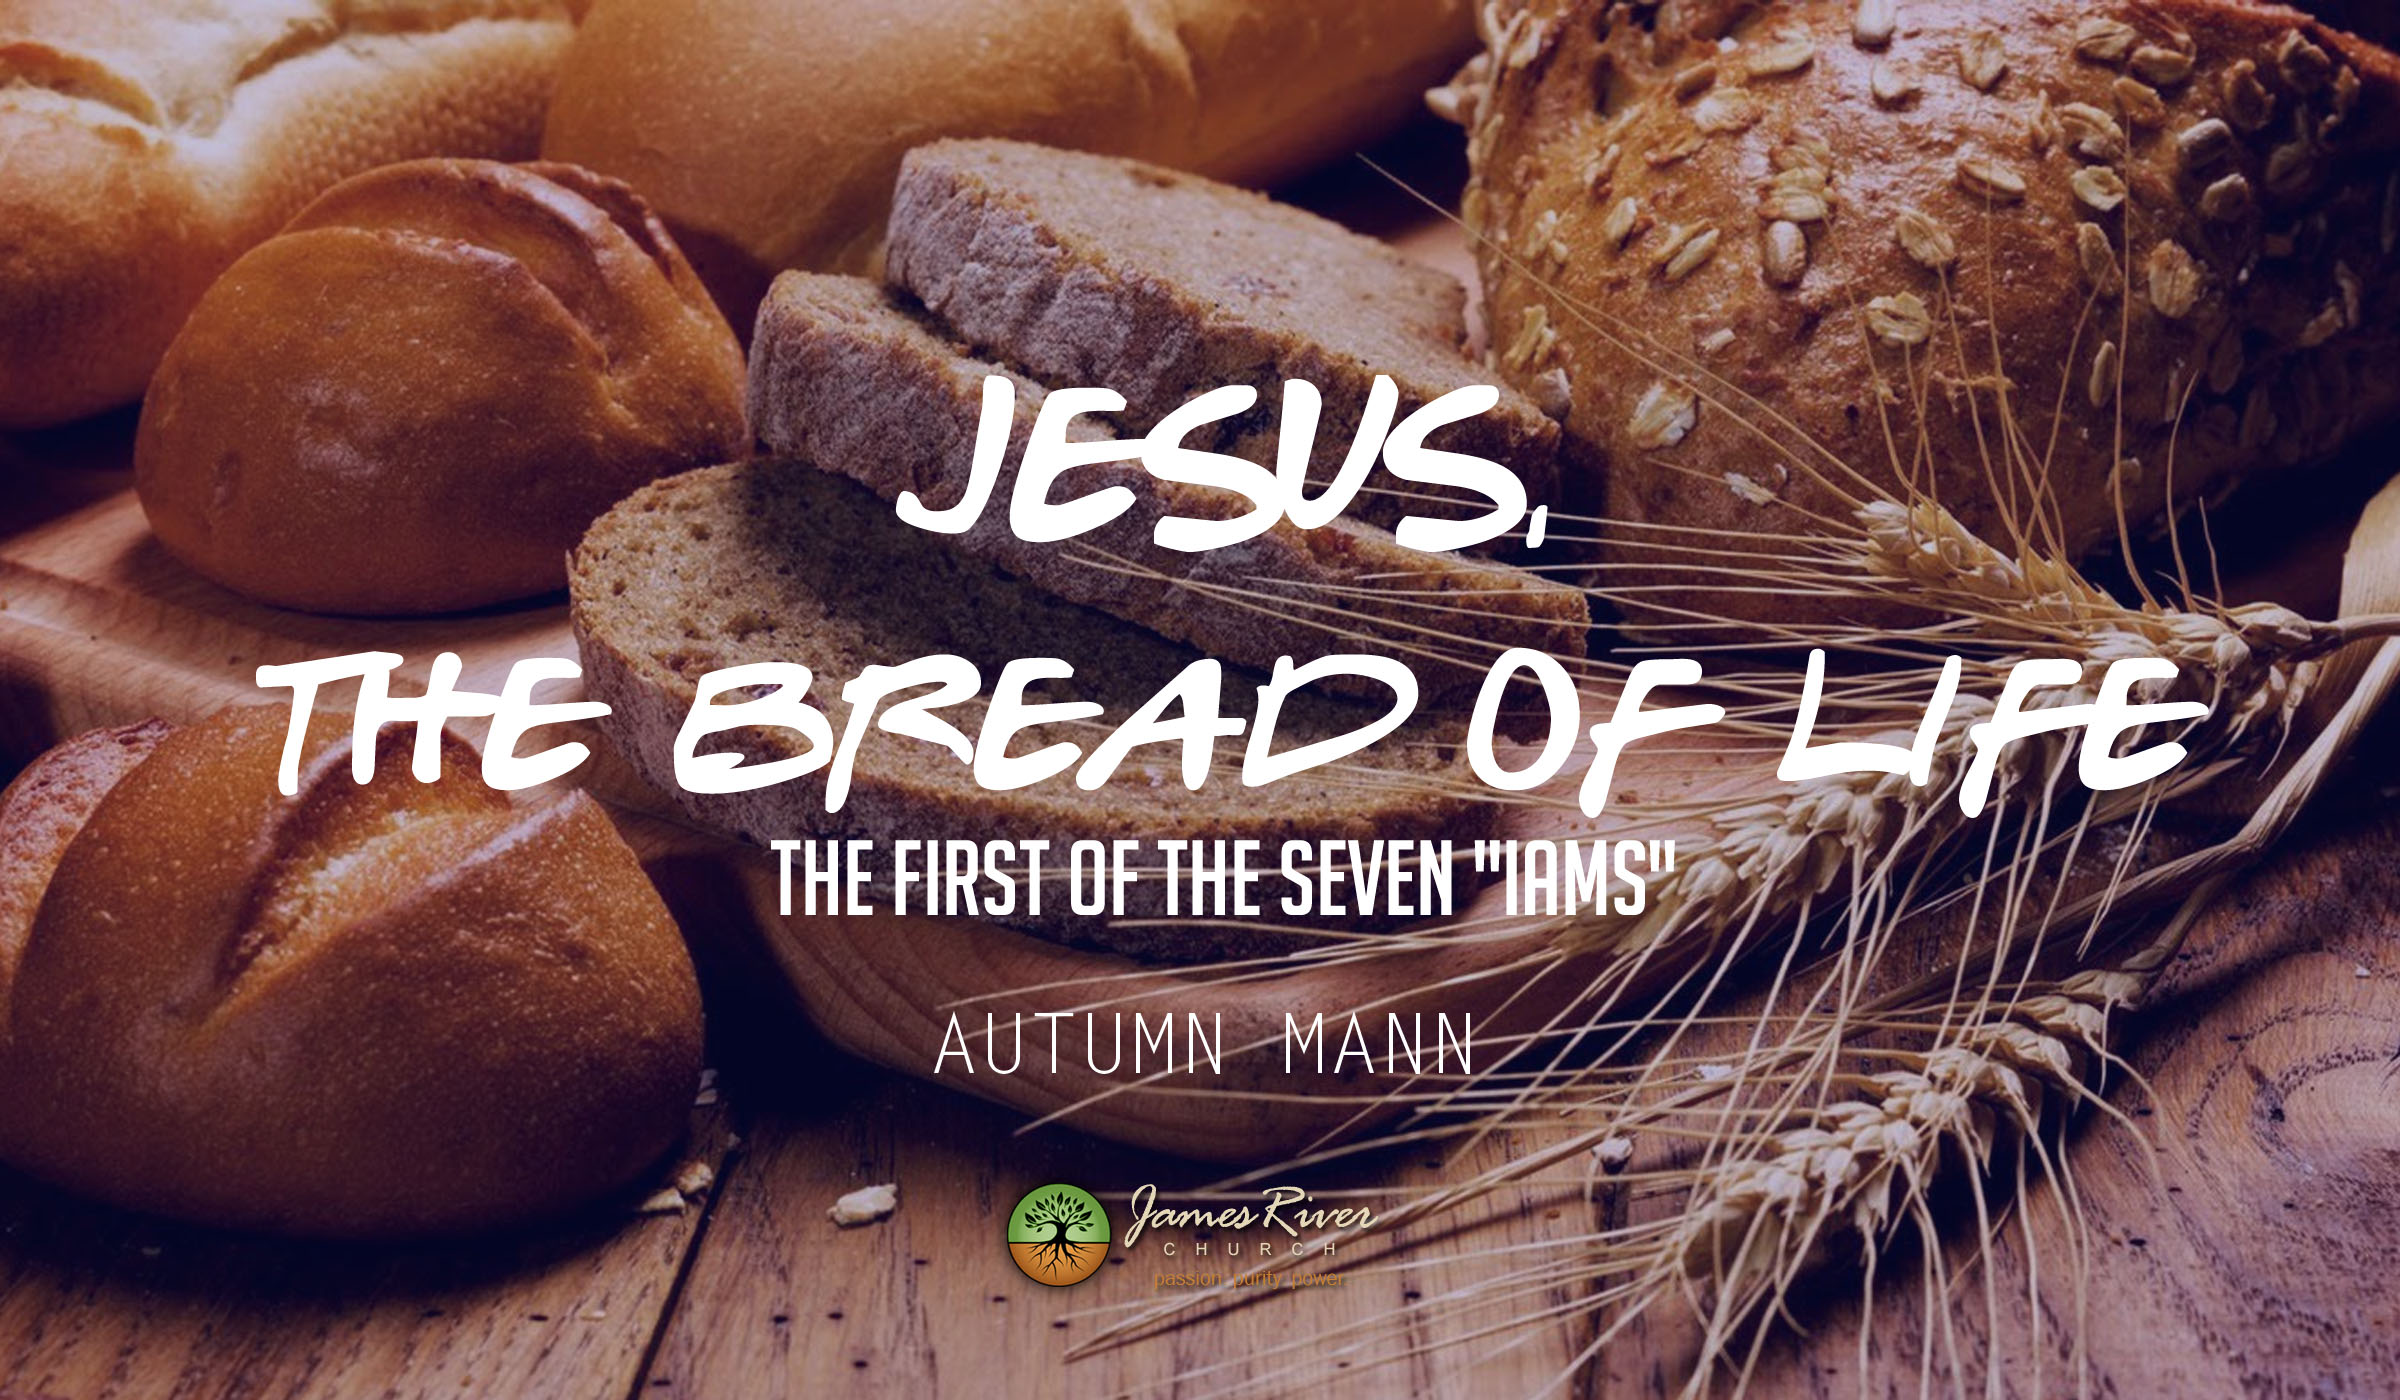 Jesus, The Bread of Life, The First of the Seven “I Ams”